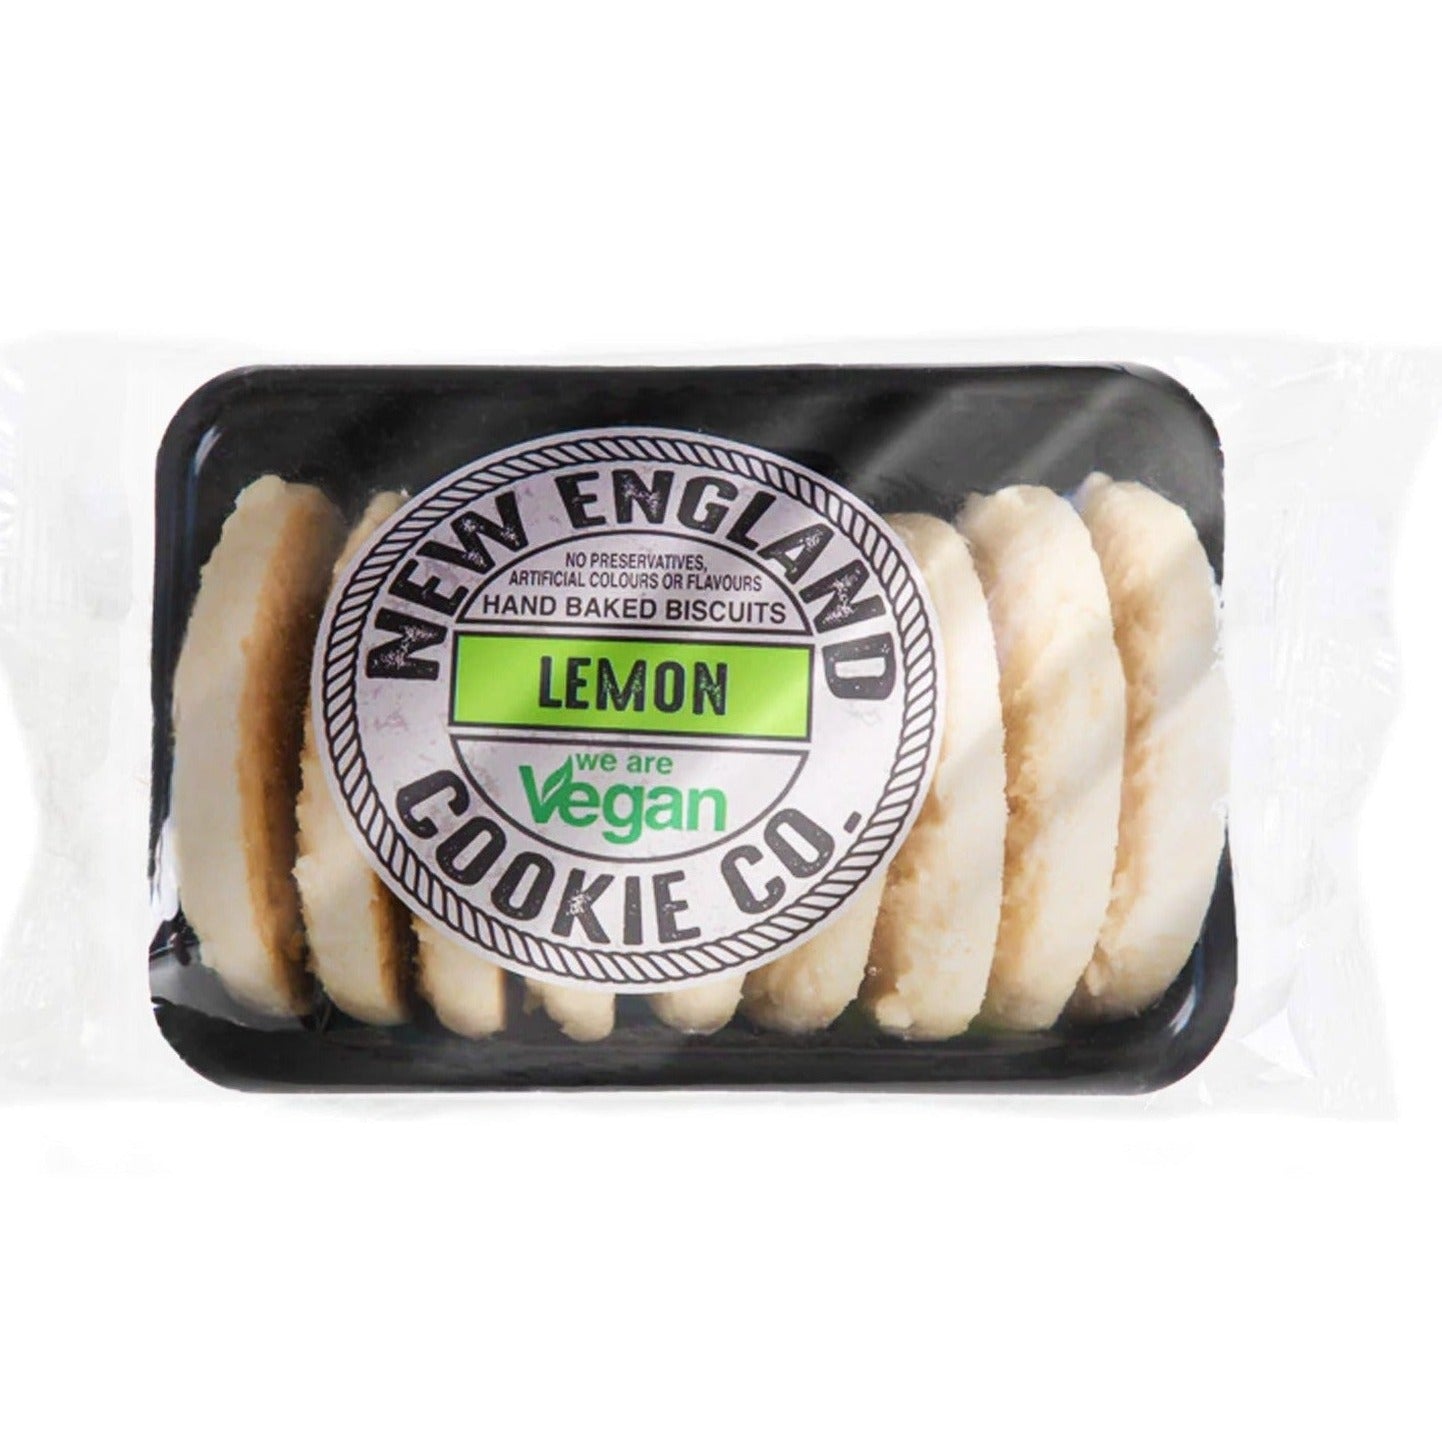 New England Cookie Co. A pack of lemon flavoured vegan cookies